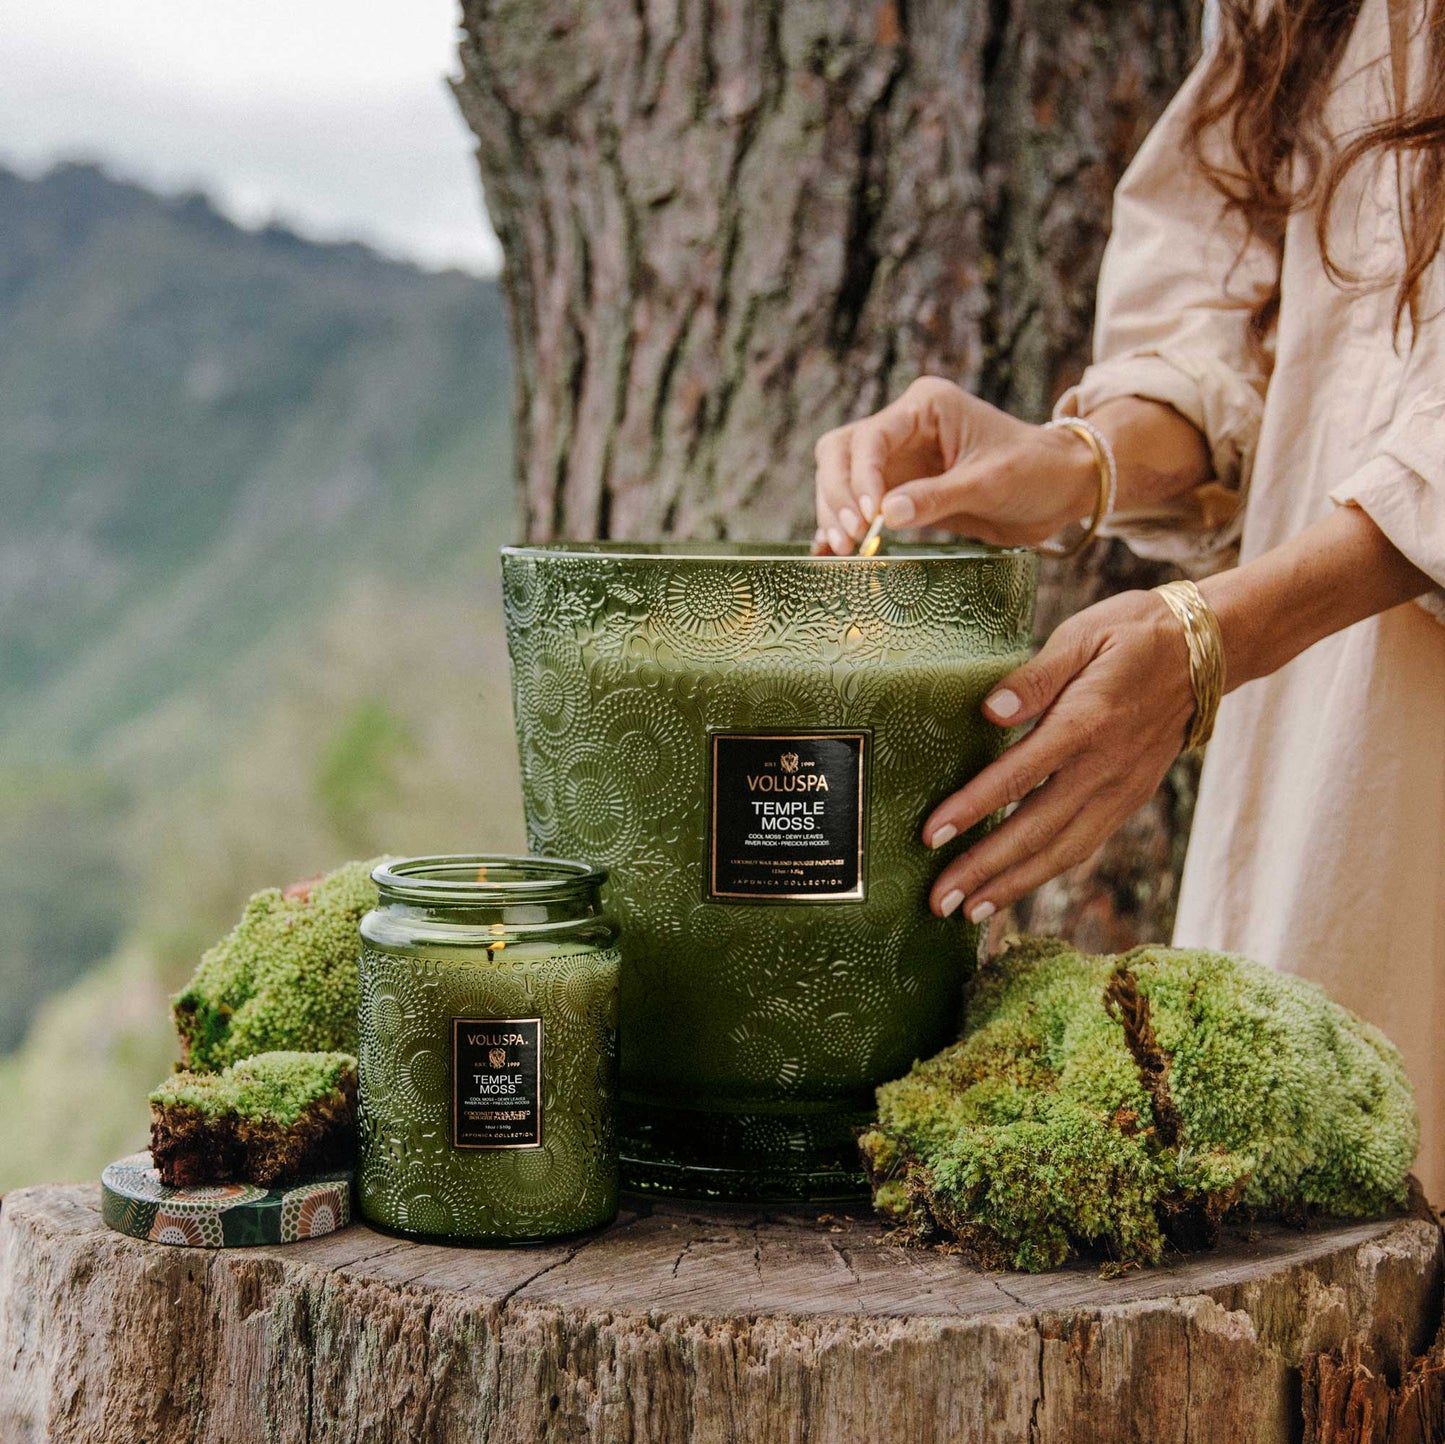 Voluspa : Temple Moss Candle